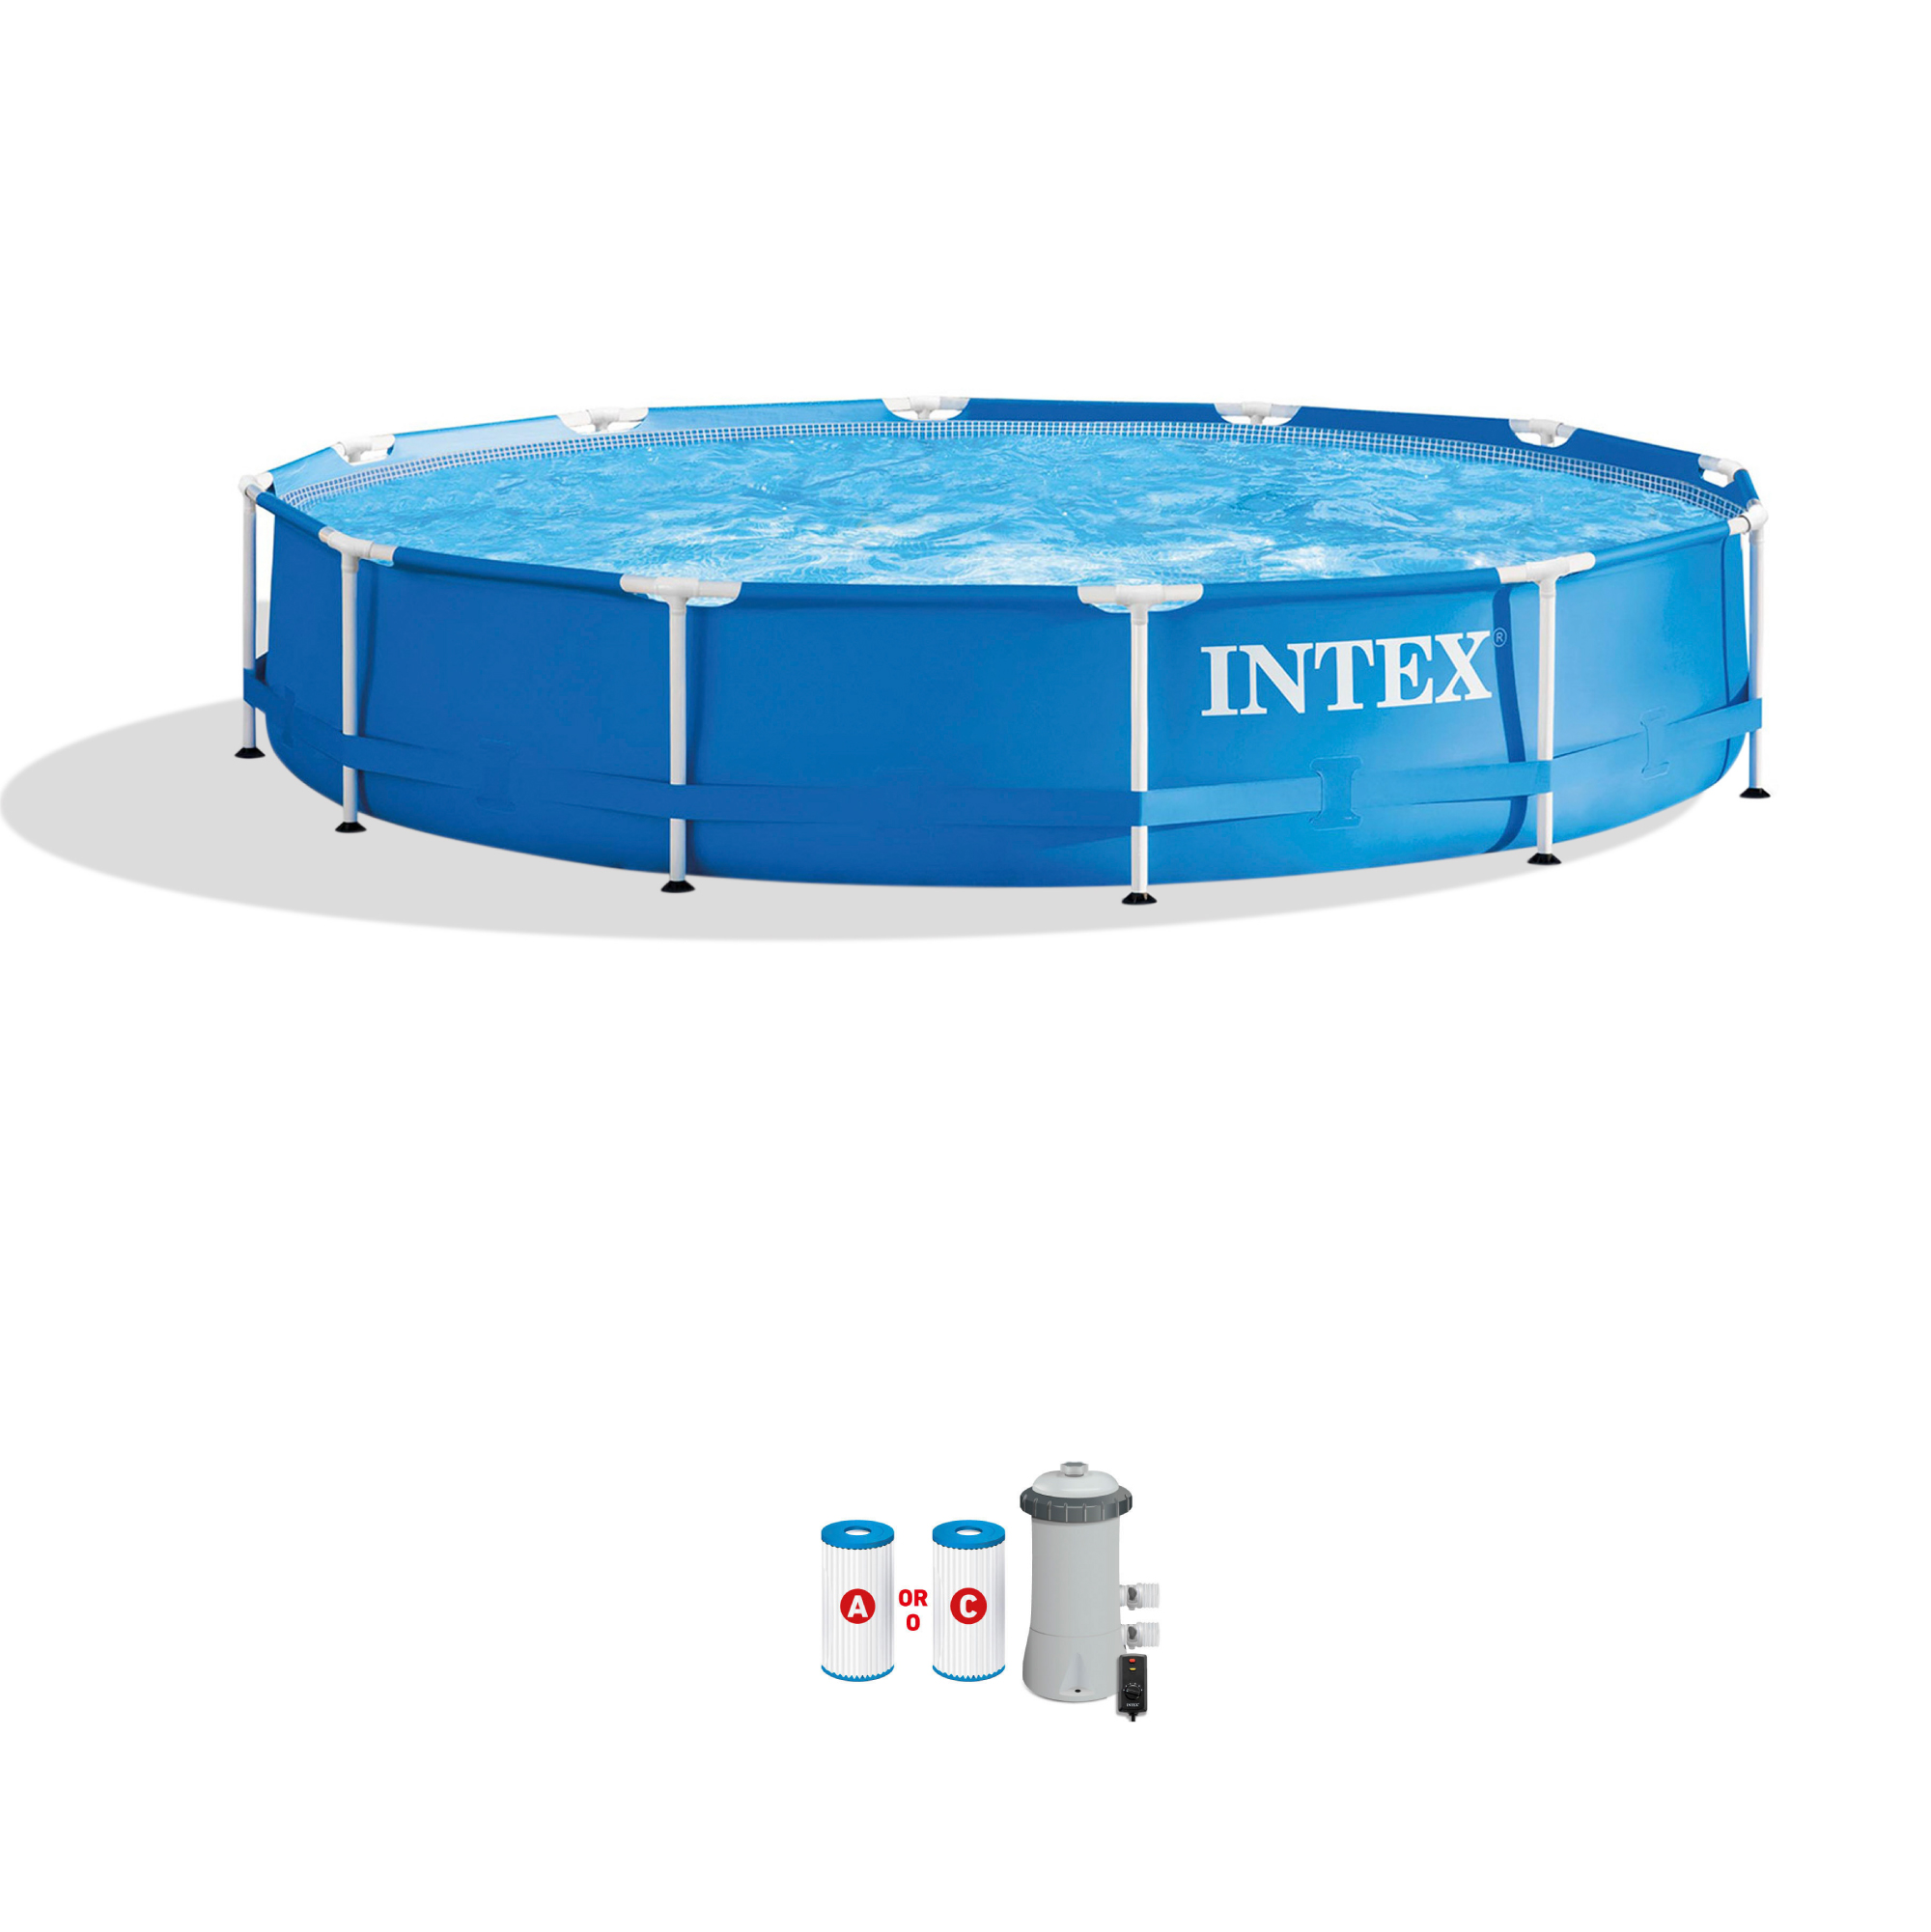 Intex 12' x 30'' Metal Frame Above Ground Swimming Pool with Filter Pump - image 1 of 13